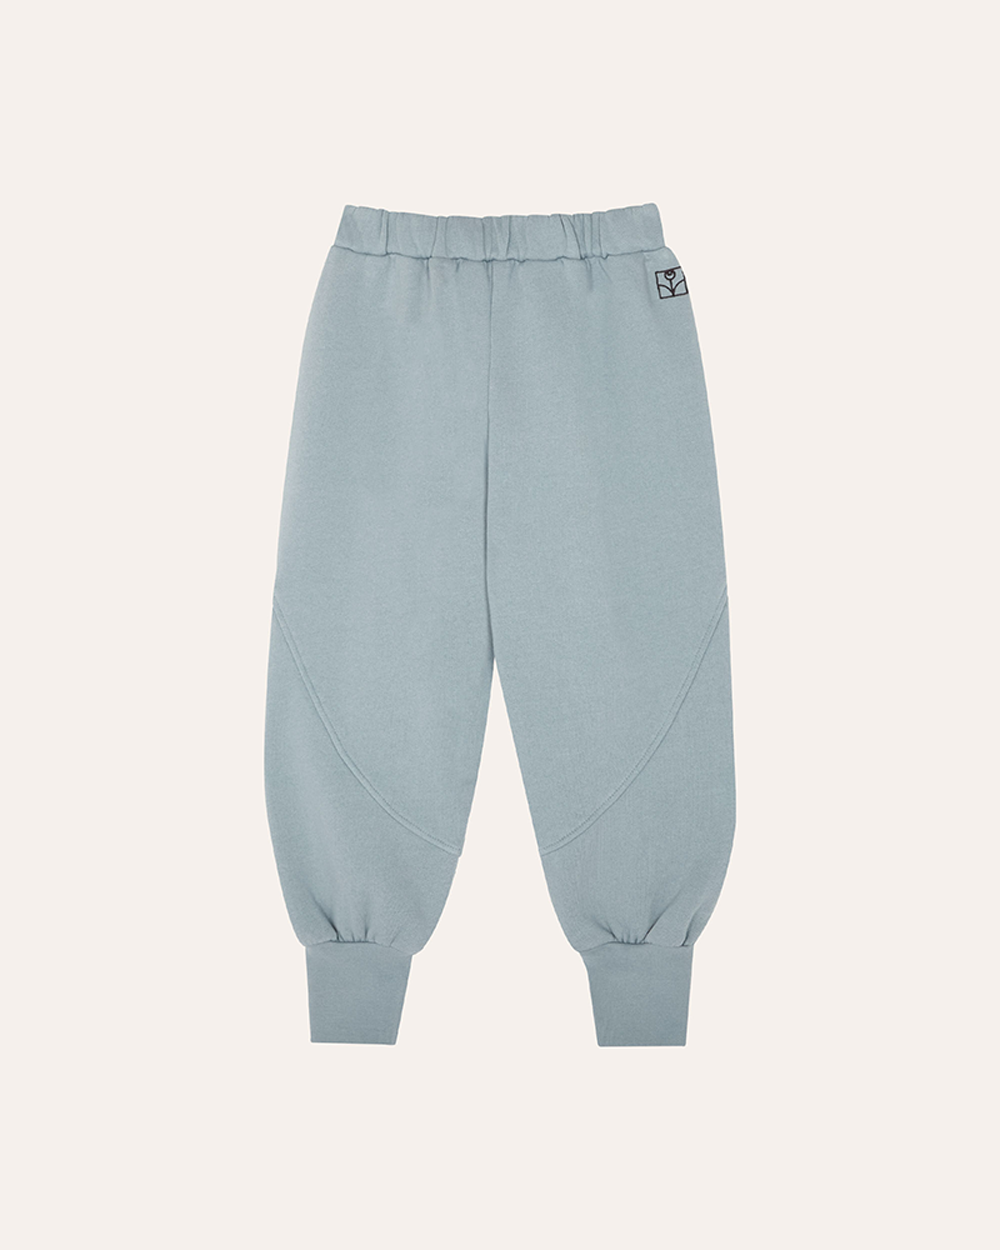 [ THE CAMPAMENTO ] LIGHT BLUE KIDS JOGGING TROUSERS [4Y]